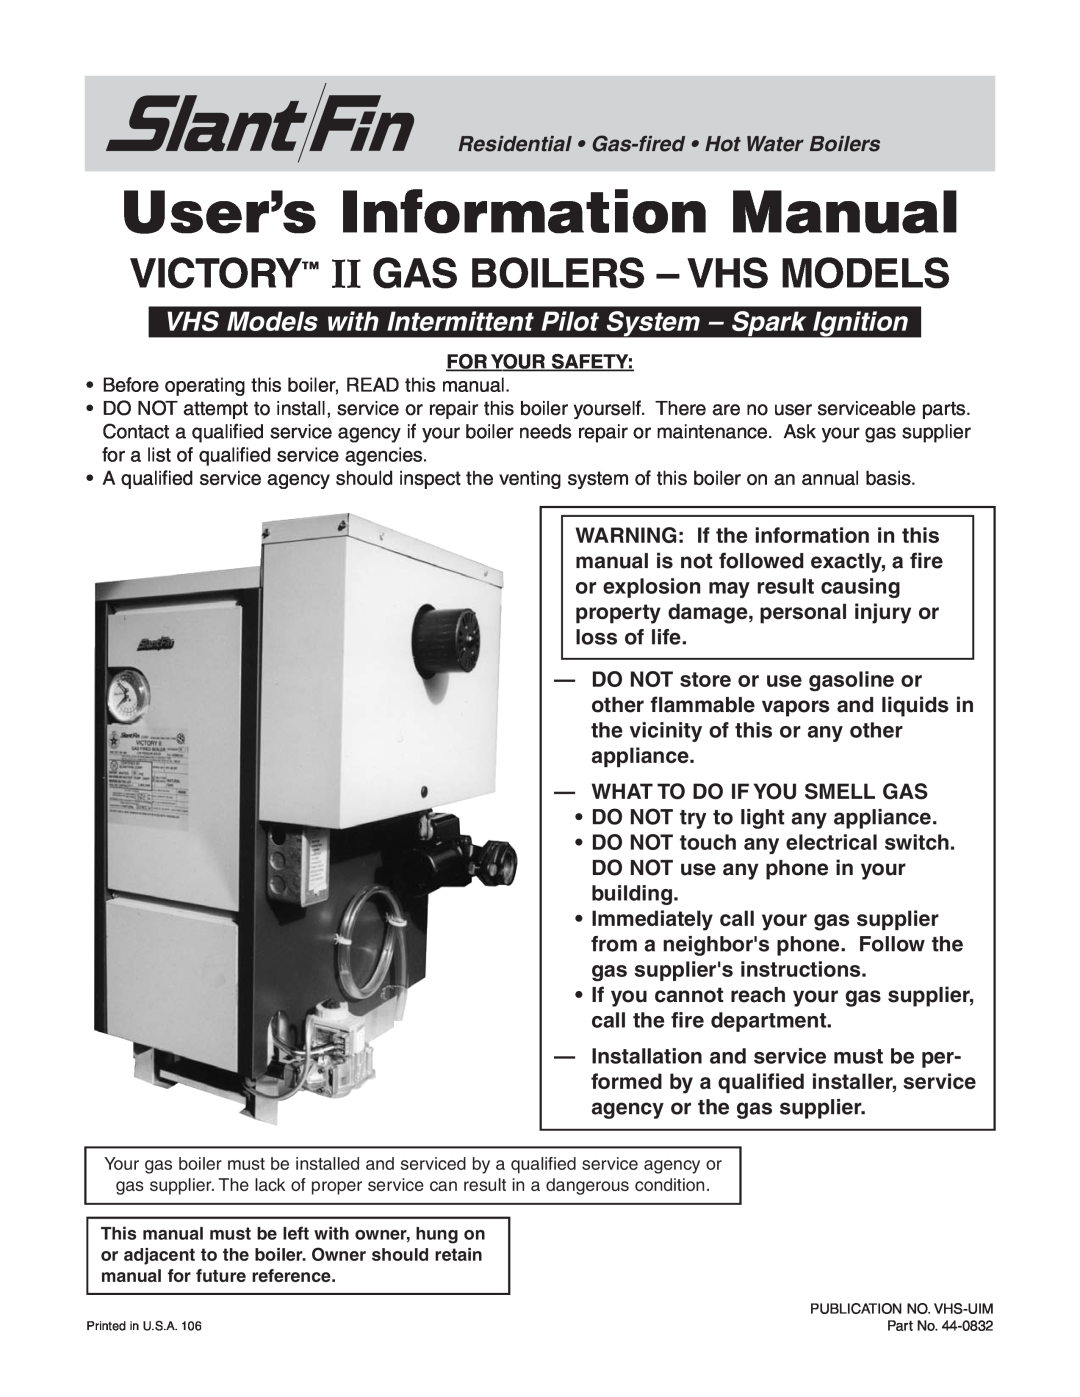 Slant/Fin VHS-120, VHS-150, VHS-90 user service Residential Gas-fired Hot Water Boilers, User’s Information Manual 